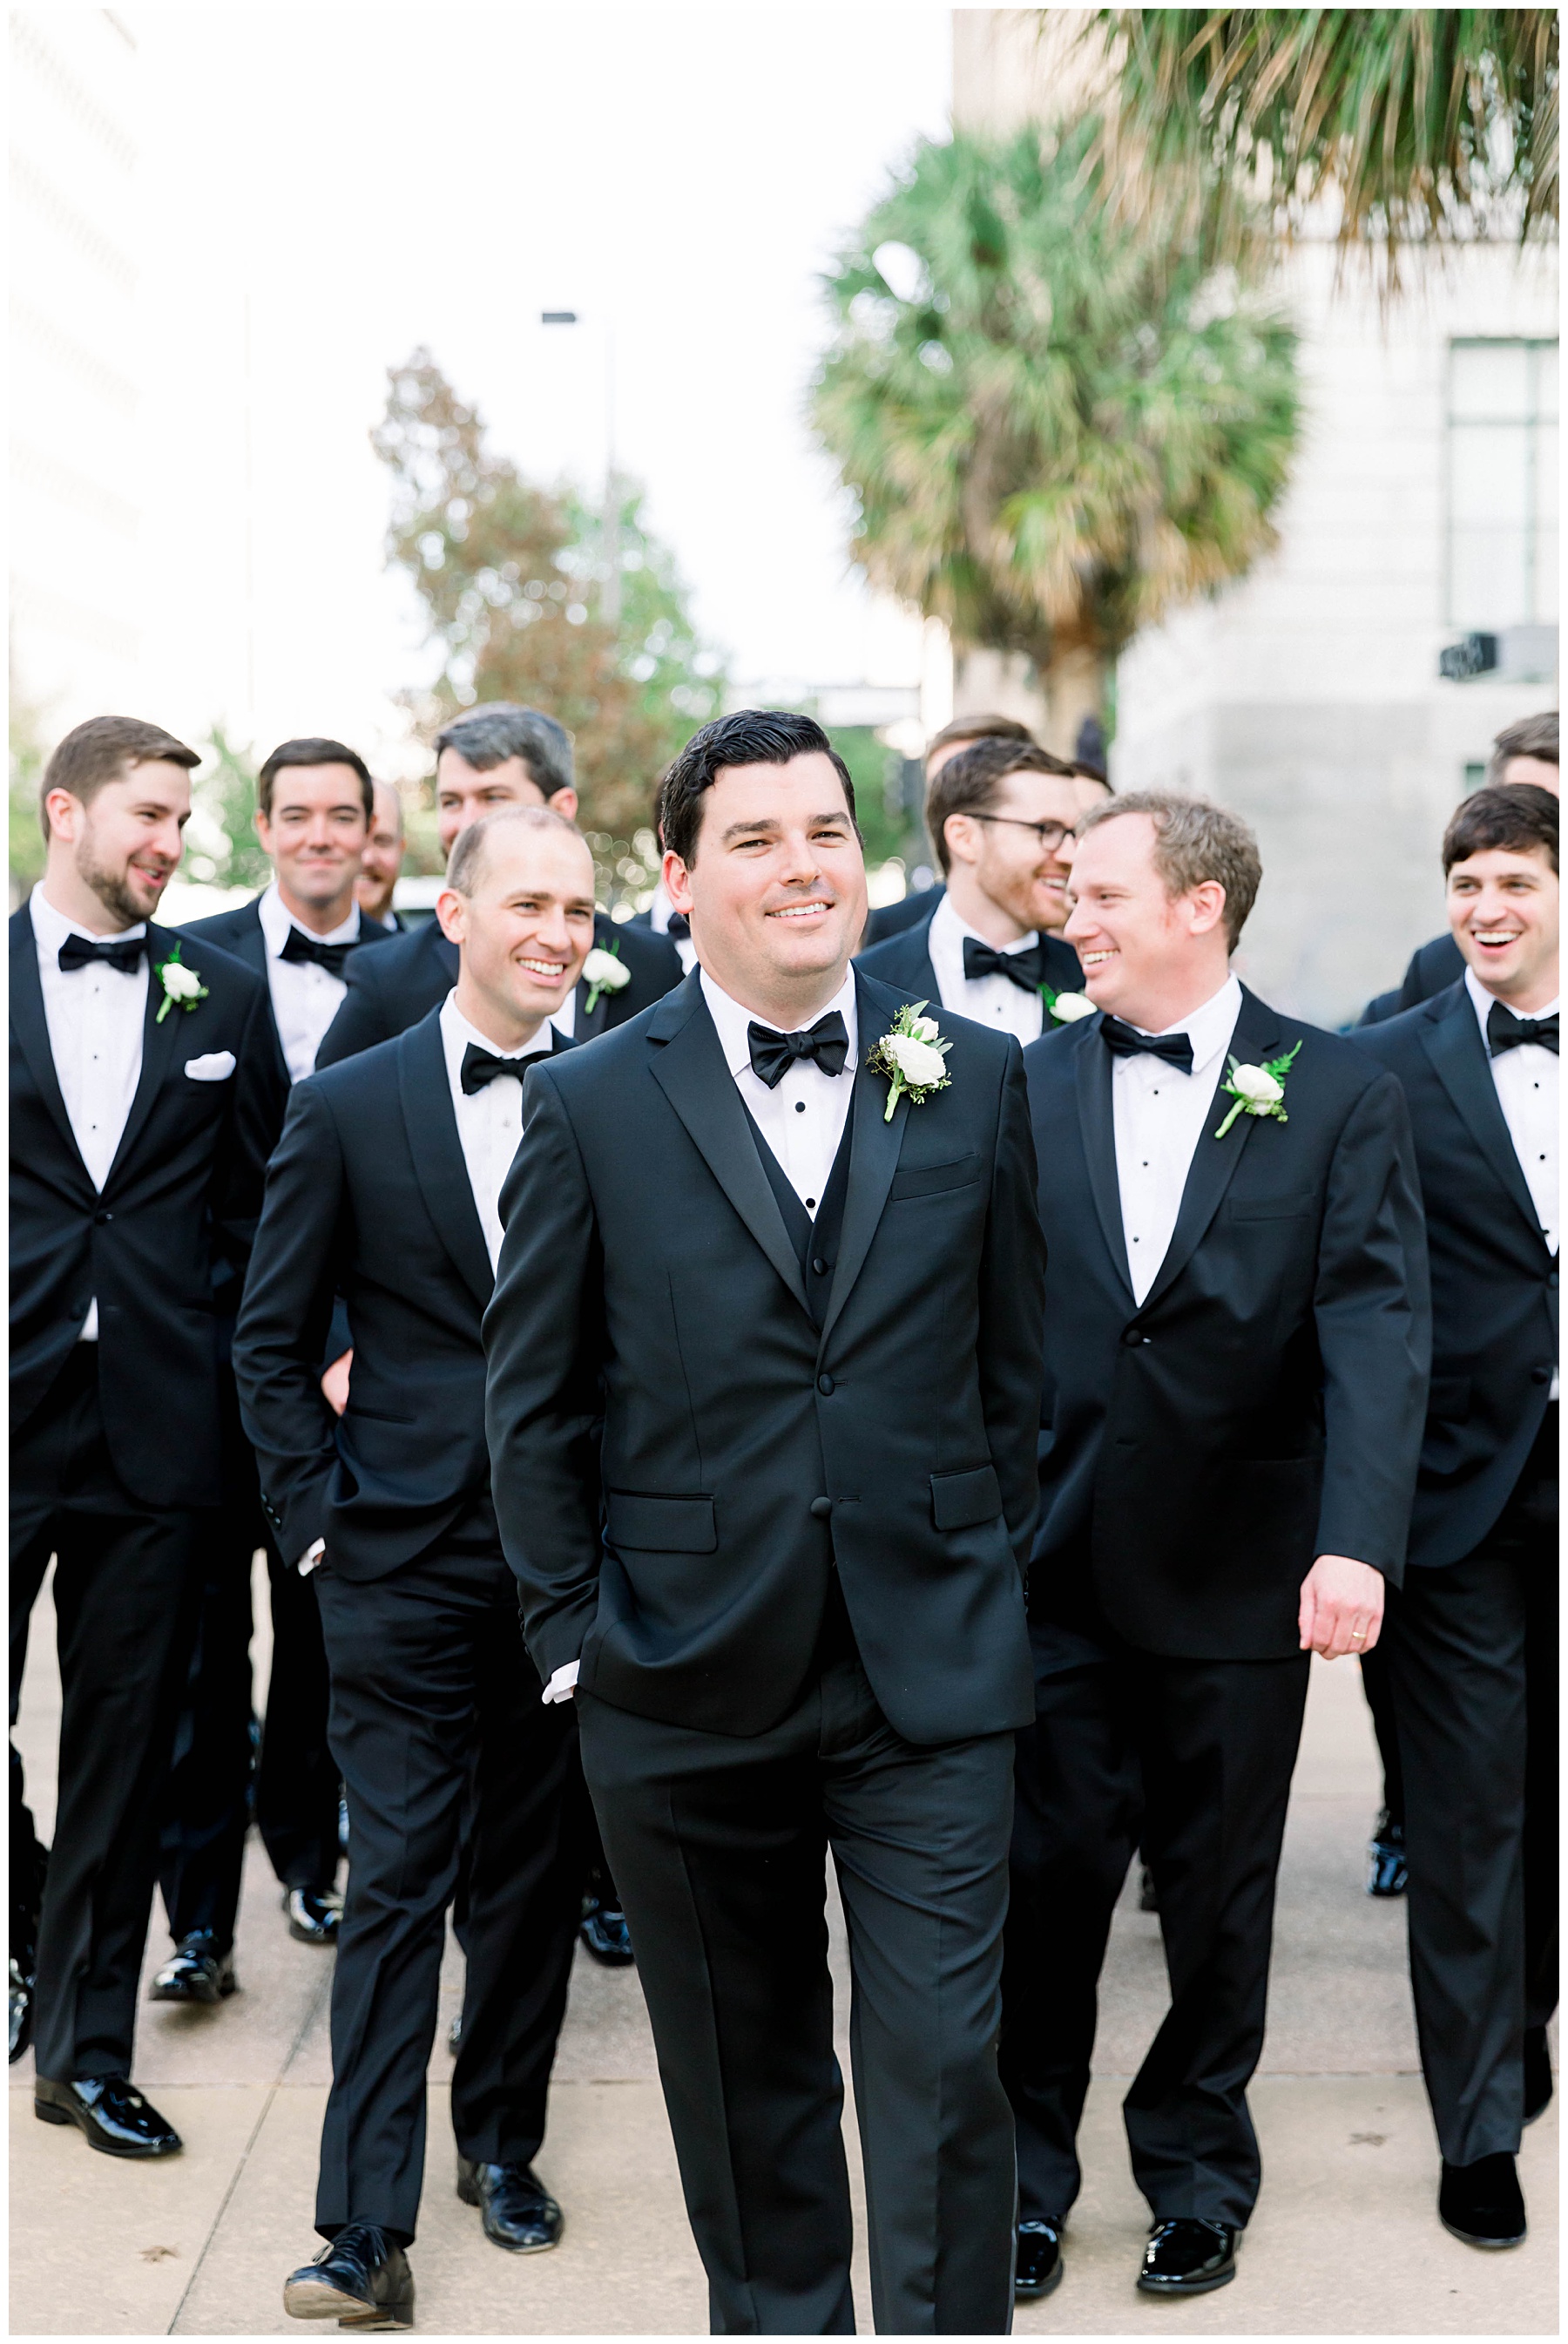 Groom and groomsmen in tuxedos walking and laughing in Downtown Tampa.